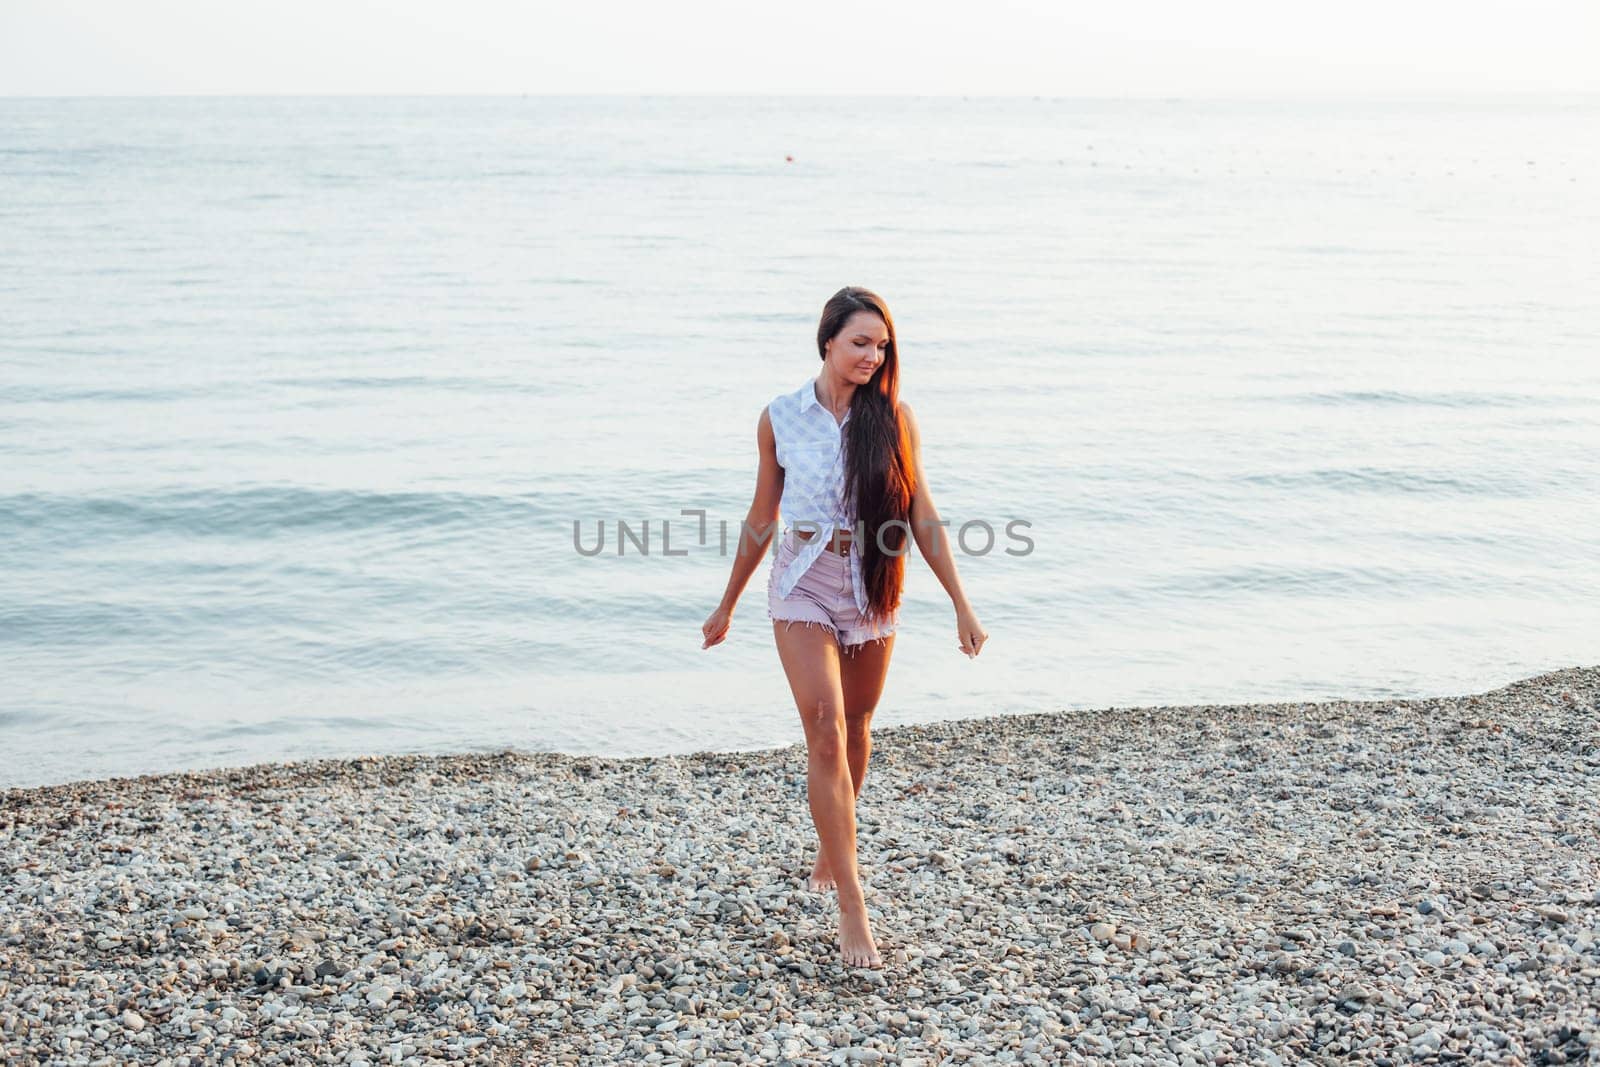 Tanned woman with long hair walks on beach by the sea by Simakov